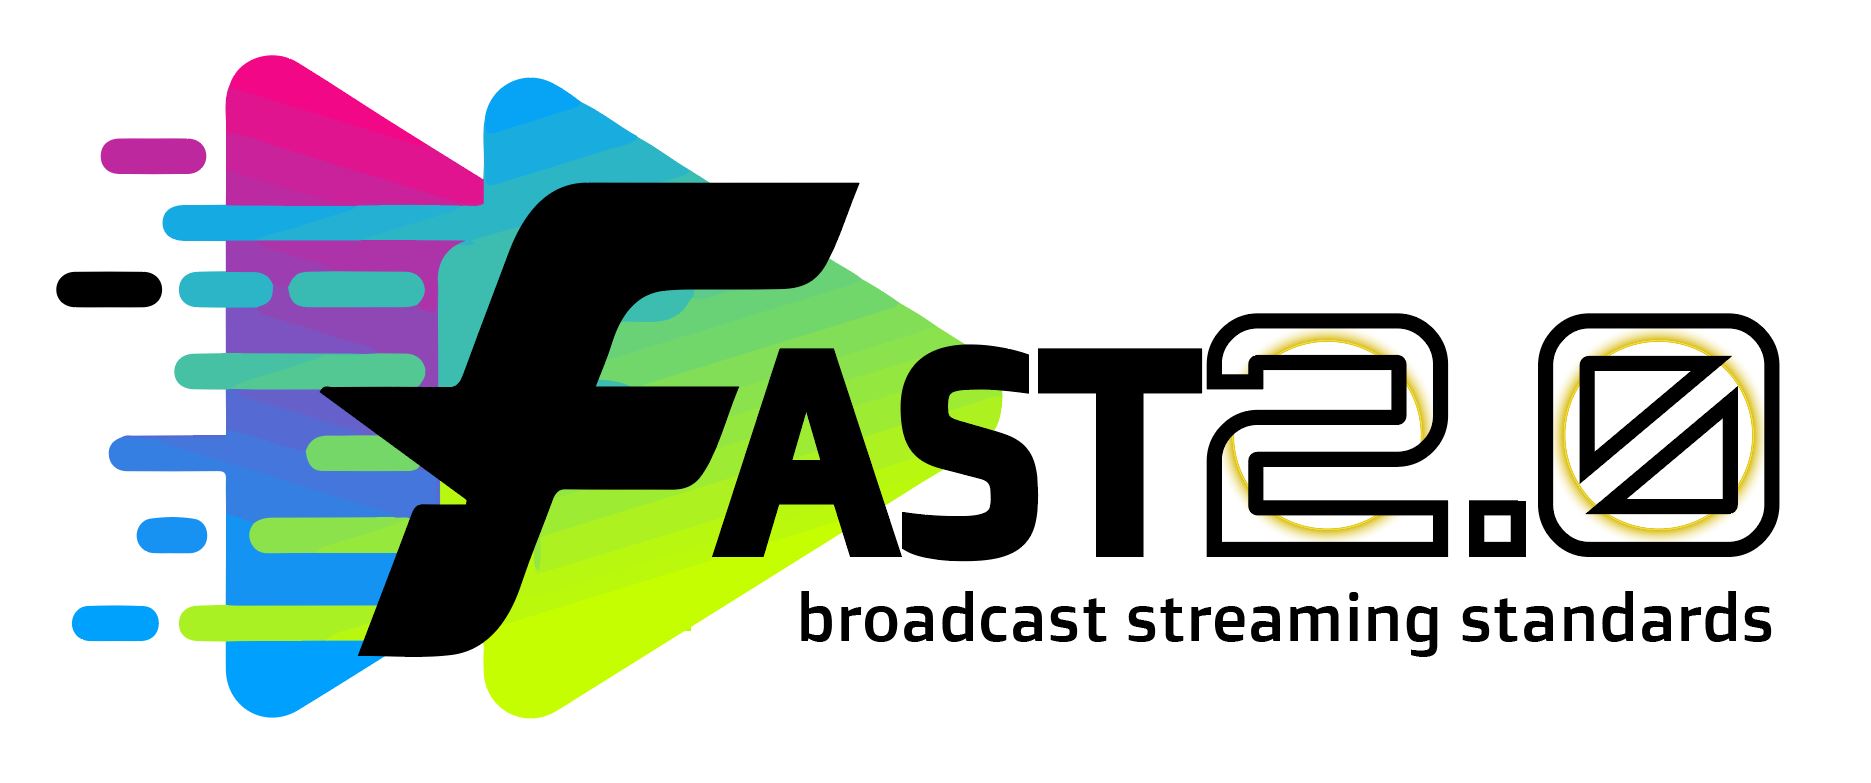 FAST2.0 is amazing for FAST channels demanding  broadcast revenues